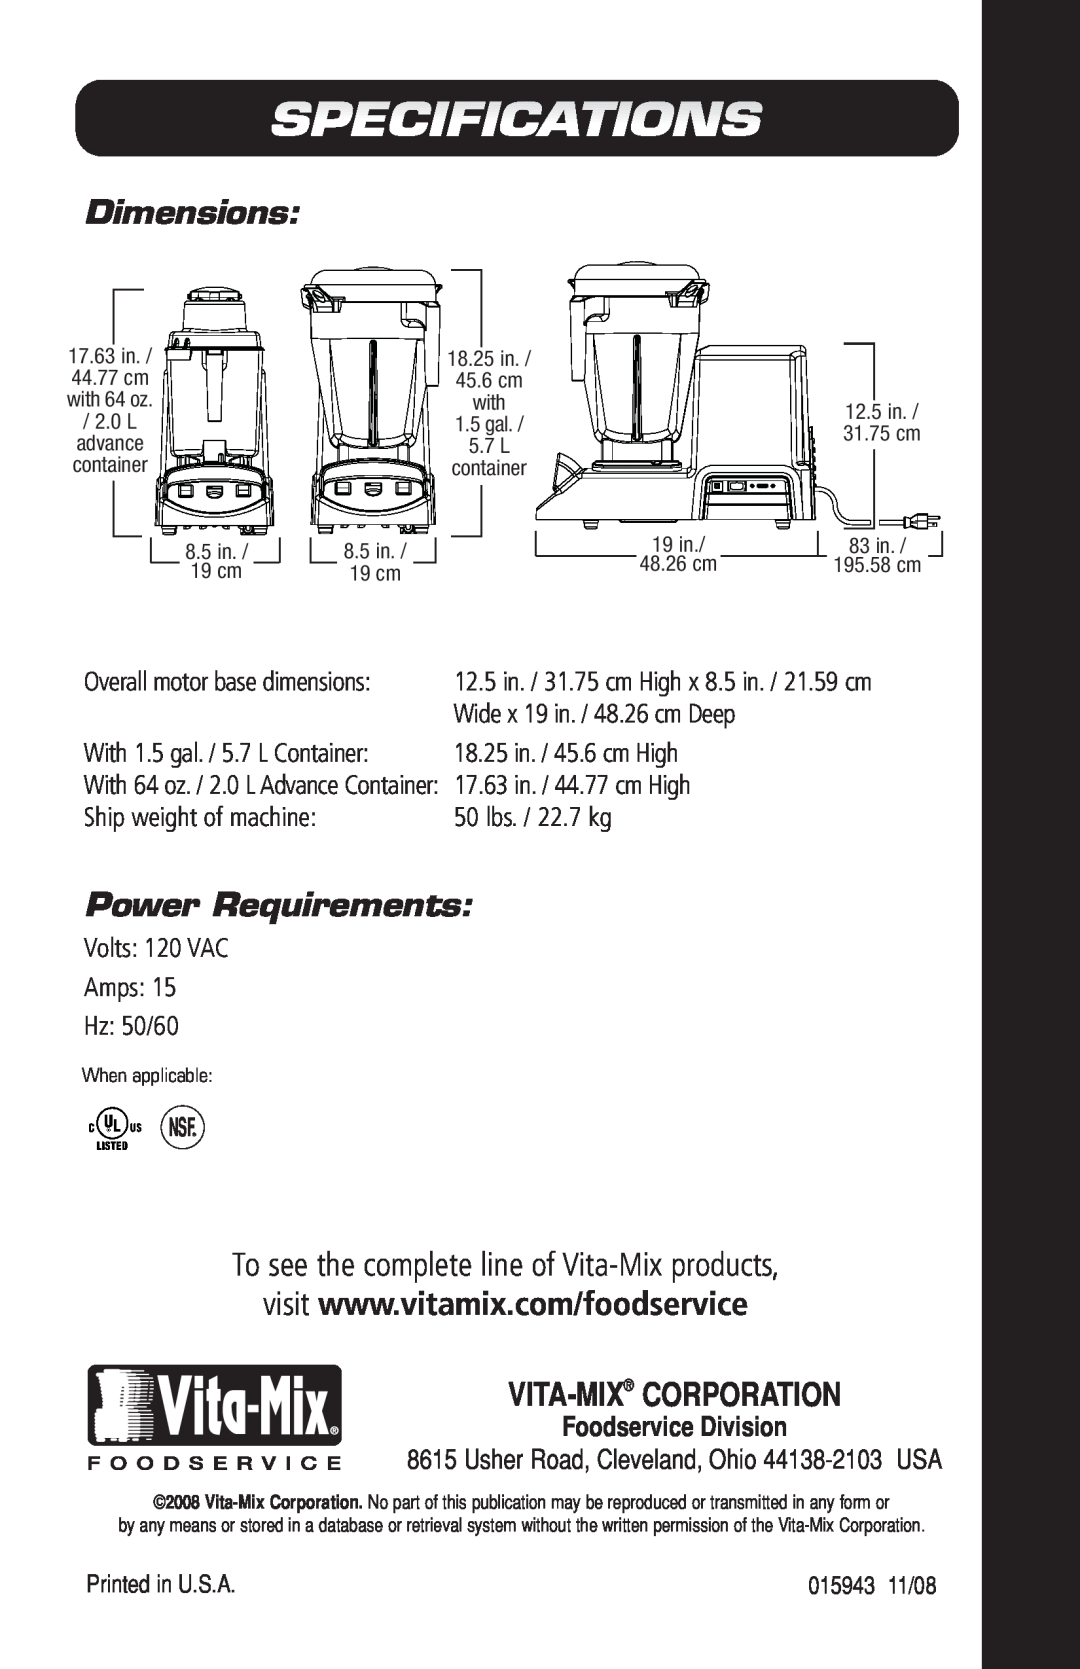 Vita-Mix VM0141 manual Dimensions, Power Requirements, To see the complete line of Vita-Mixproducts, Vita-Mix Corporation 